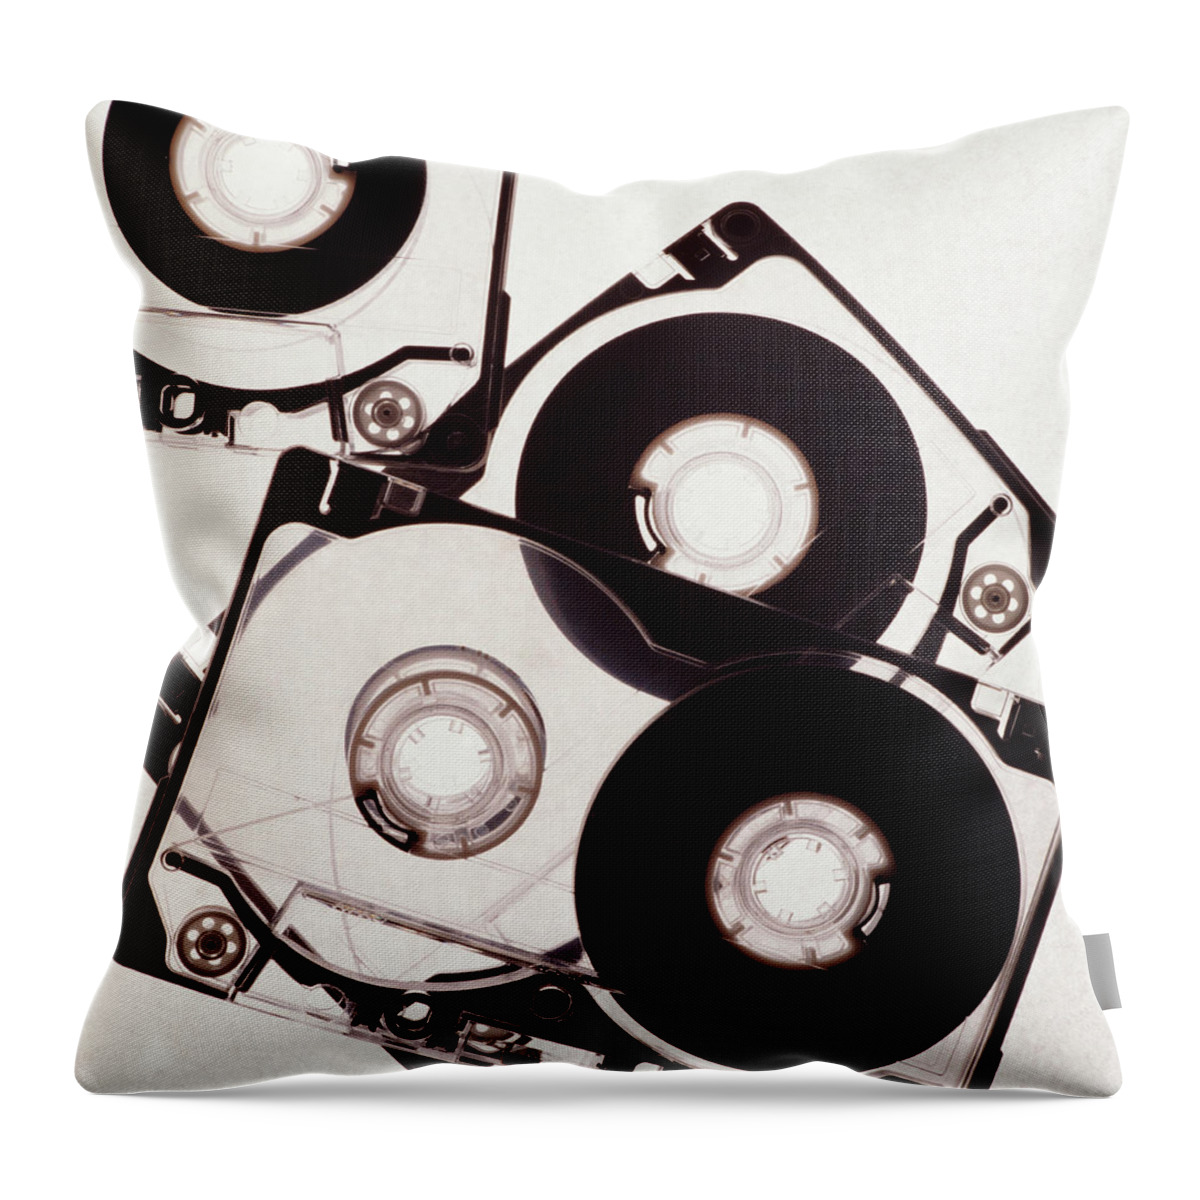 White Background Throw Pillow featuring the photograph Cassette Tapes, Overhead View by Hans Neleman